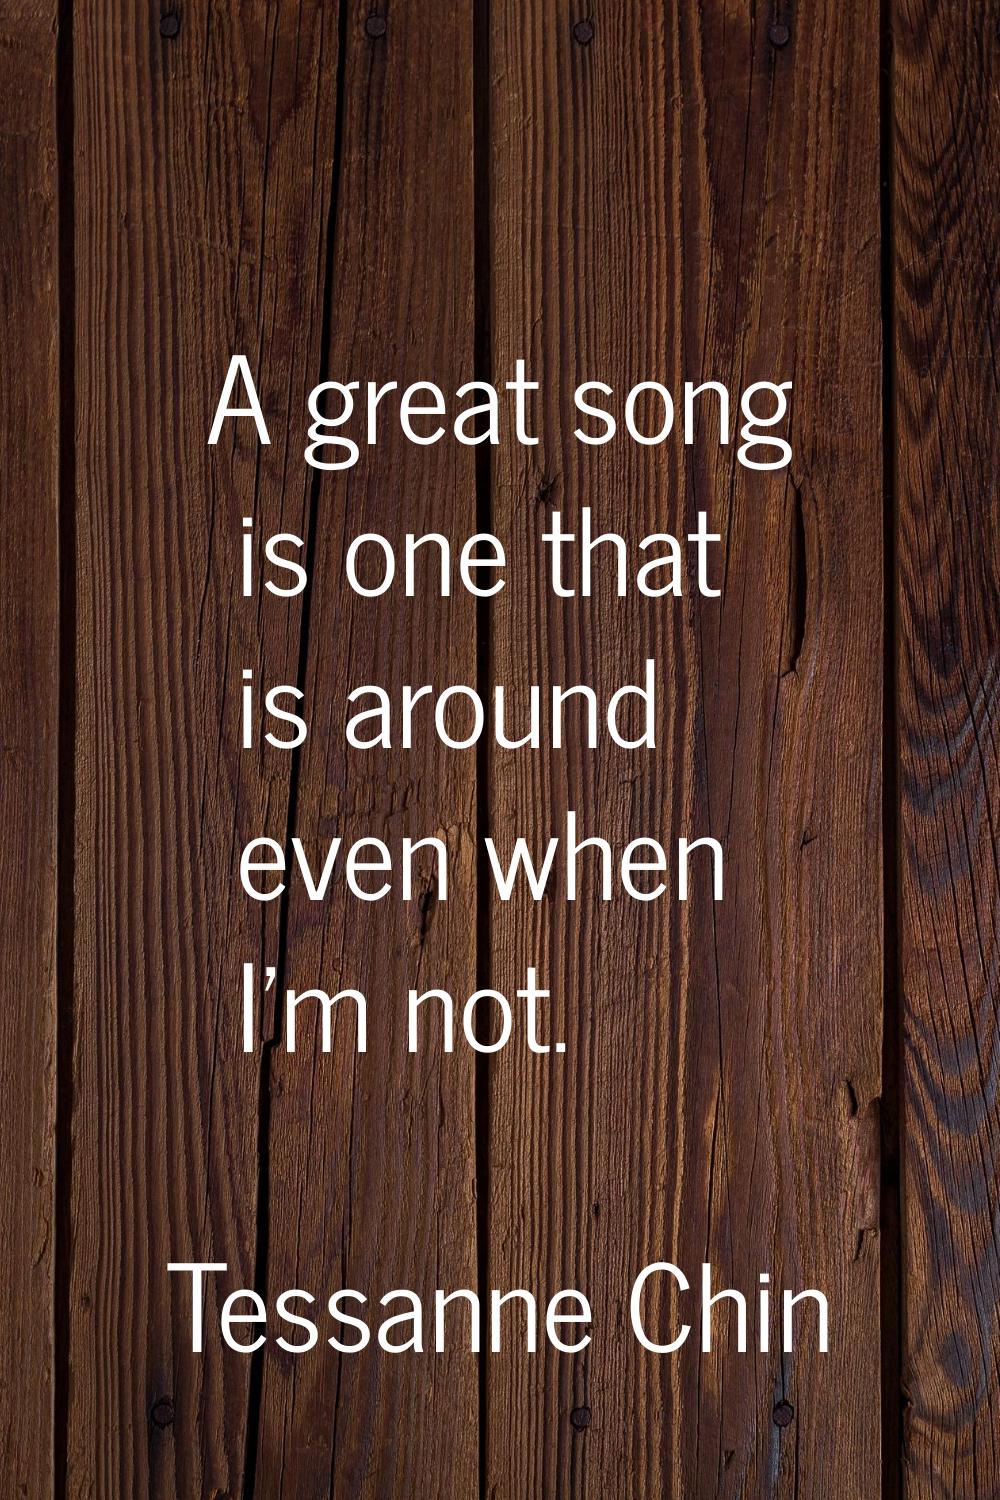 A great song is one that is around even when I'm not.